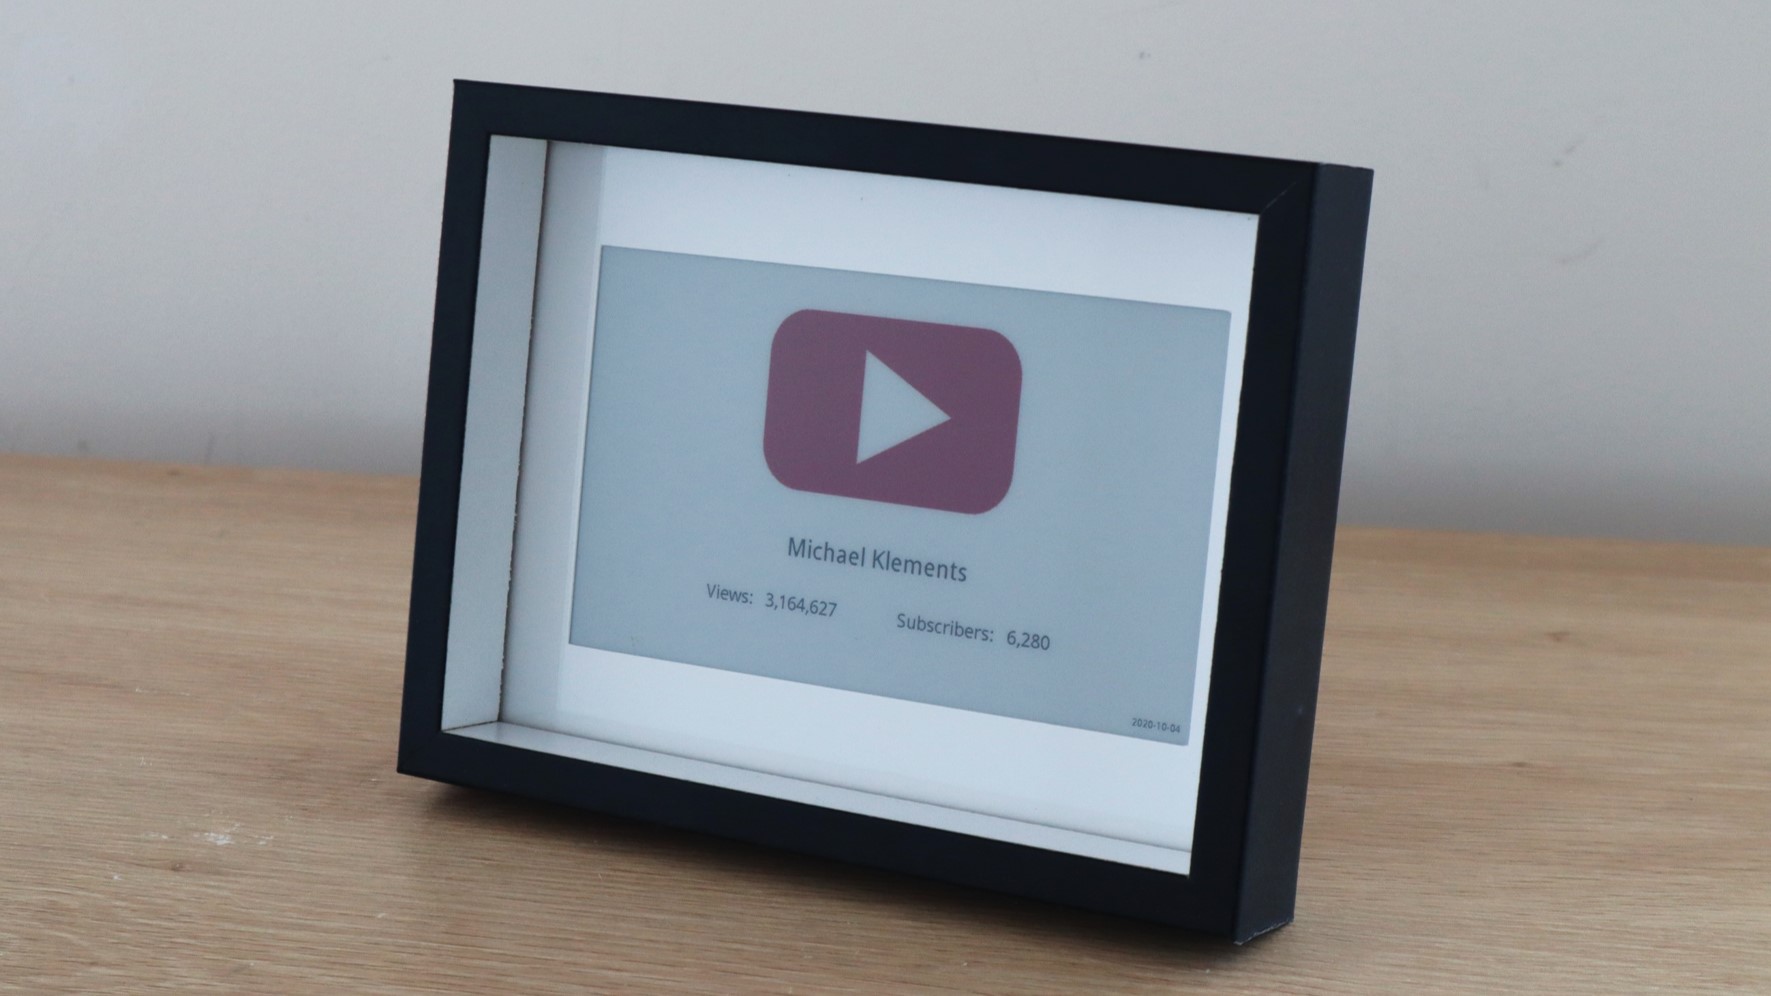 YouTube Subscriber Counter Using An E-Ink Display And A Raspberry Pi Zero W